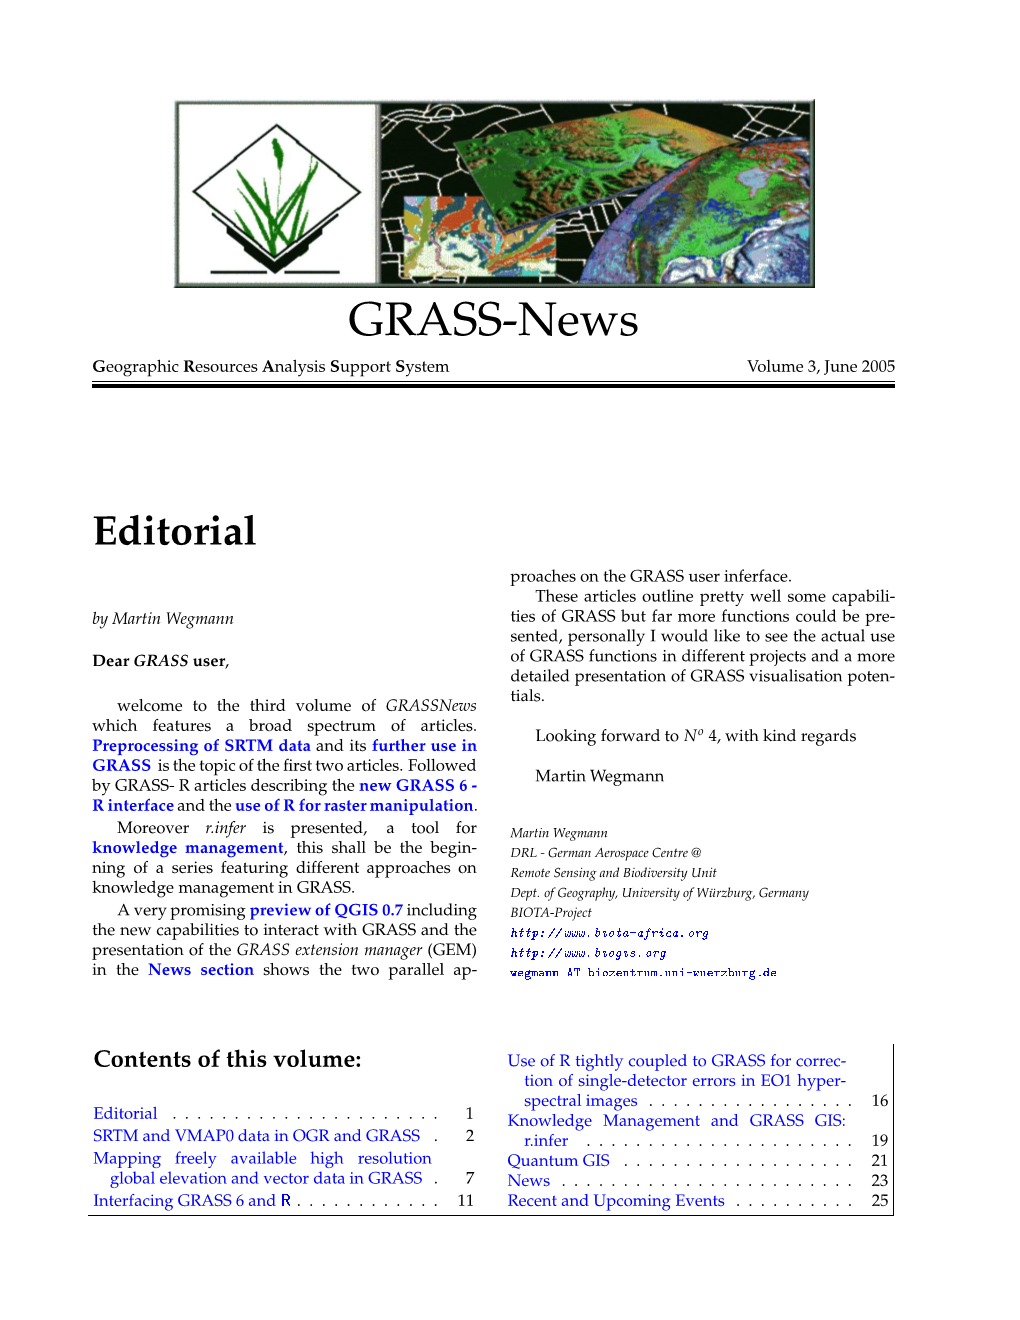 GRASS-News Geographic Resources Analysis Support System Volume 3, June 2005